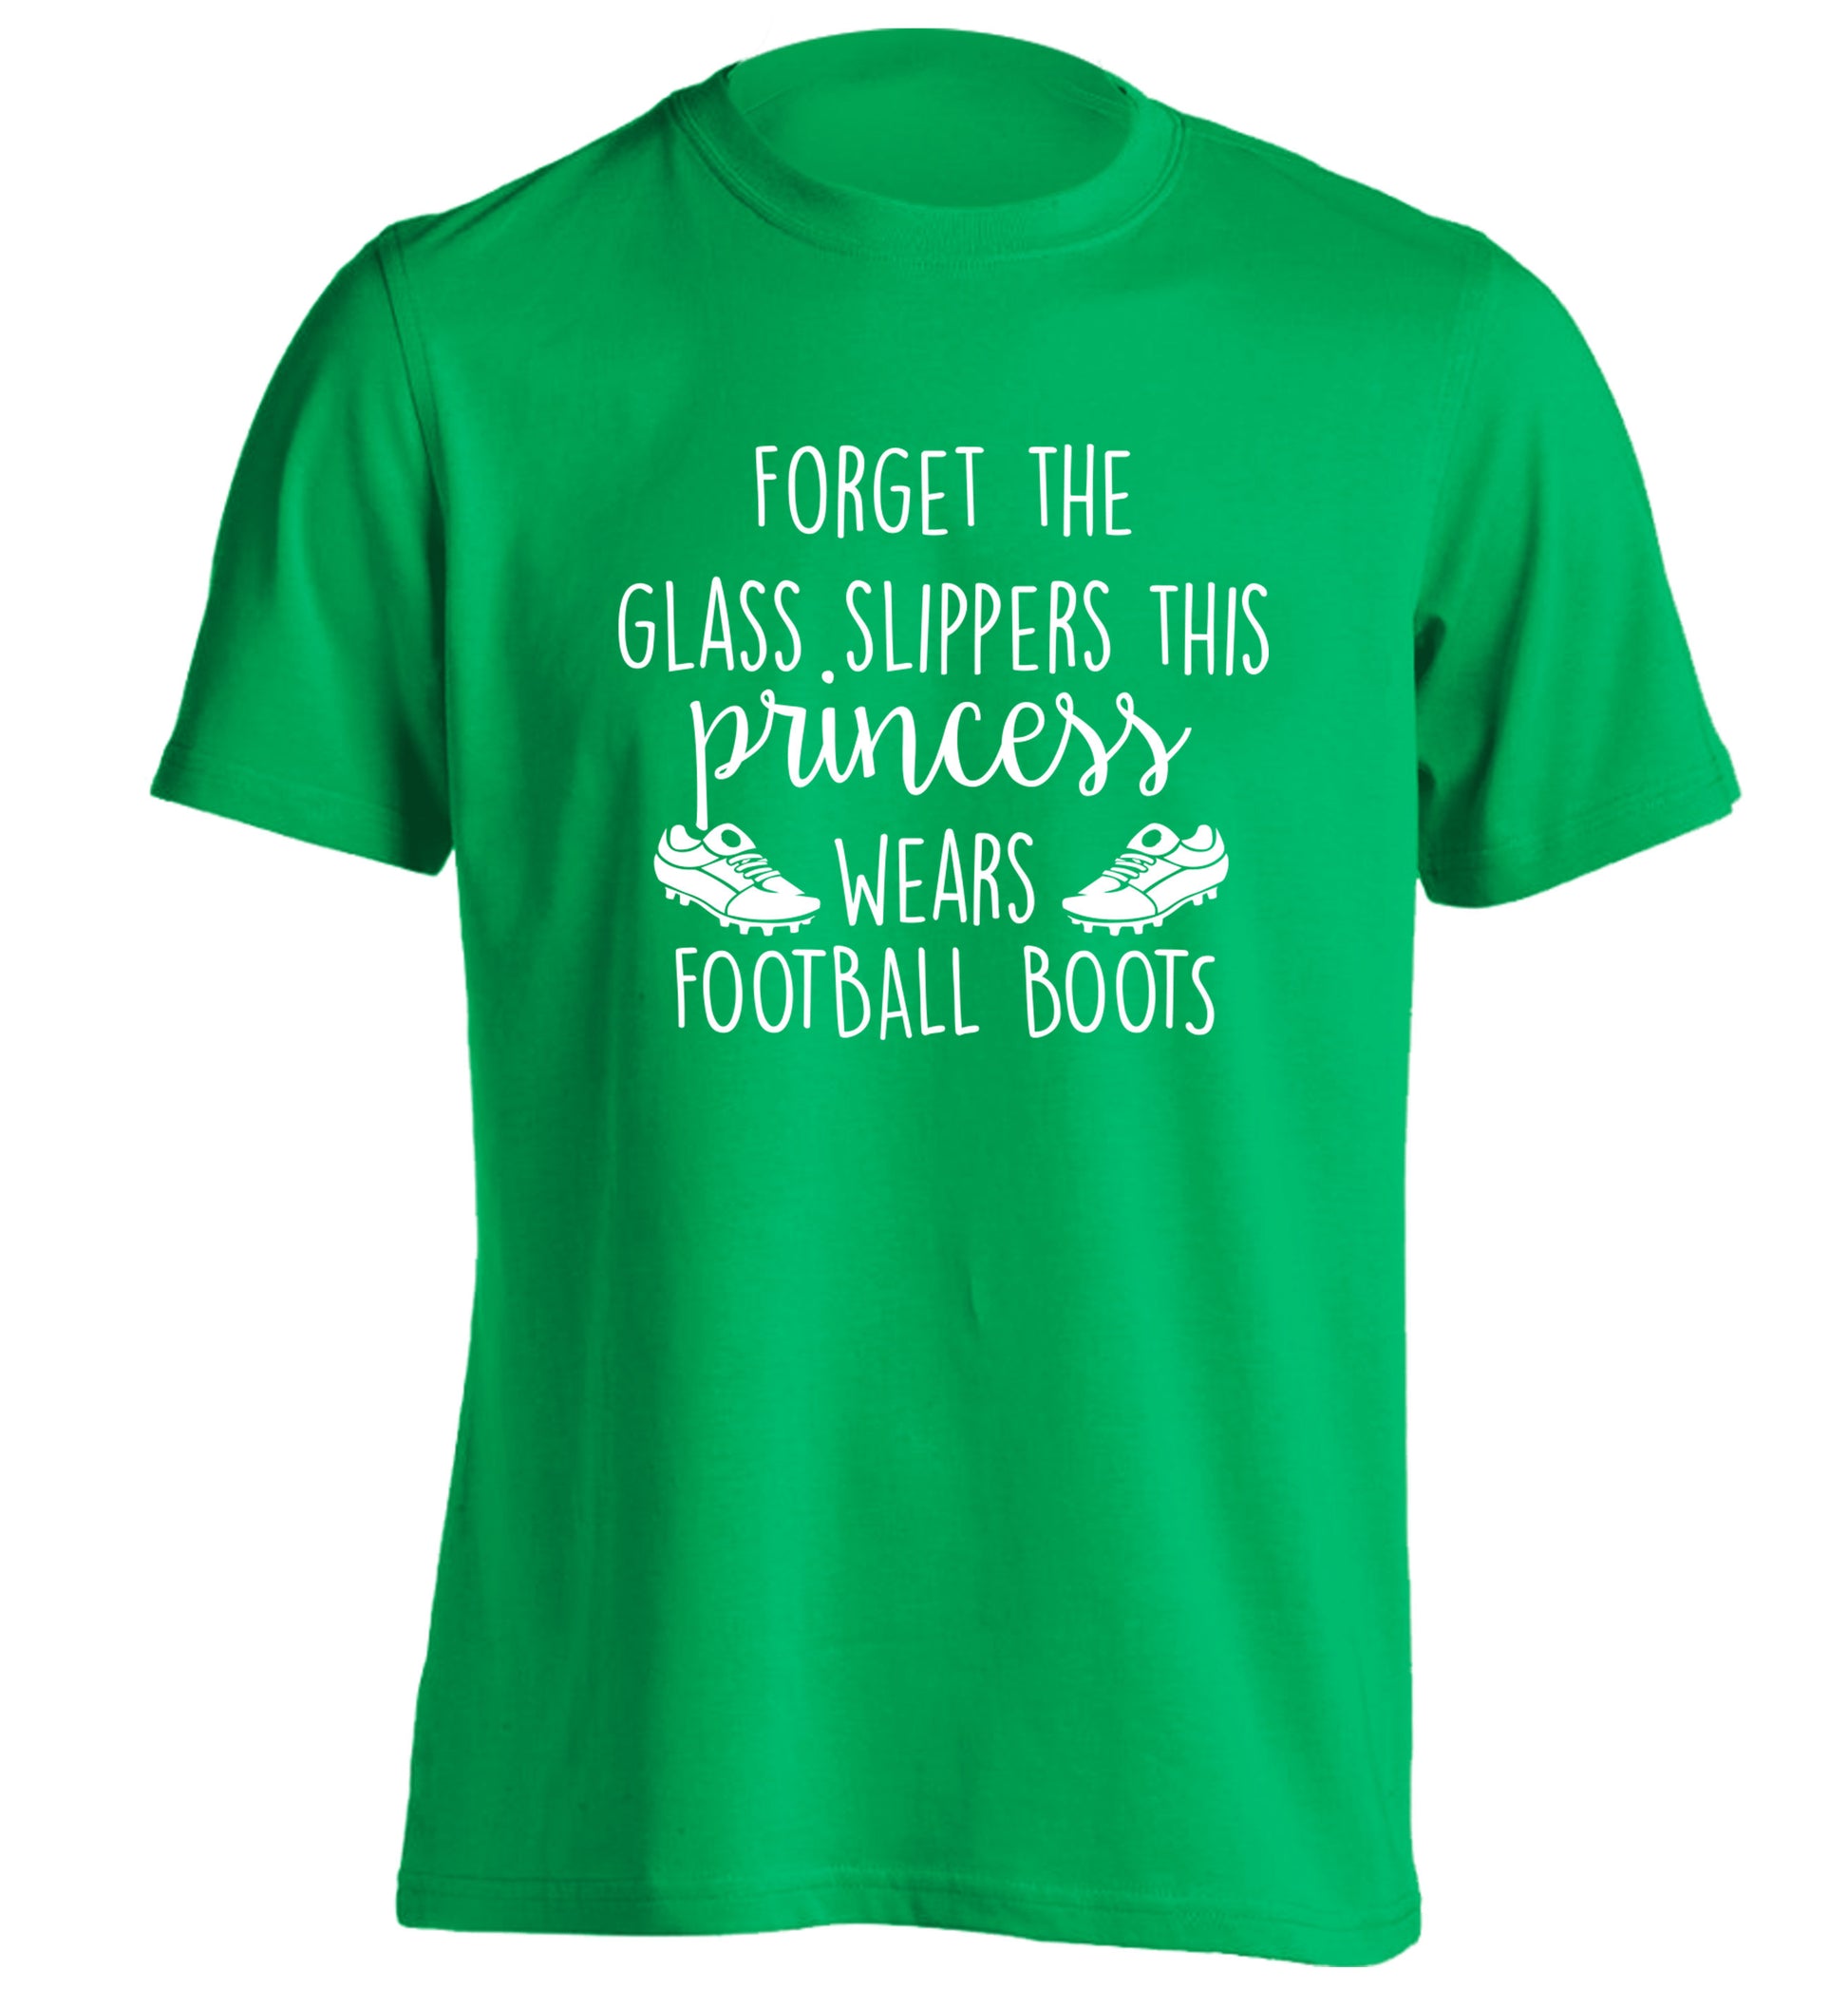 Forget the glass slippers this princess wears football boots adults unisex green Tshirt 2XL